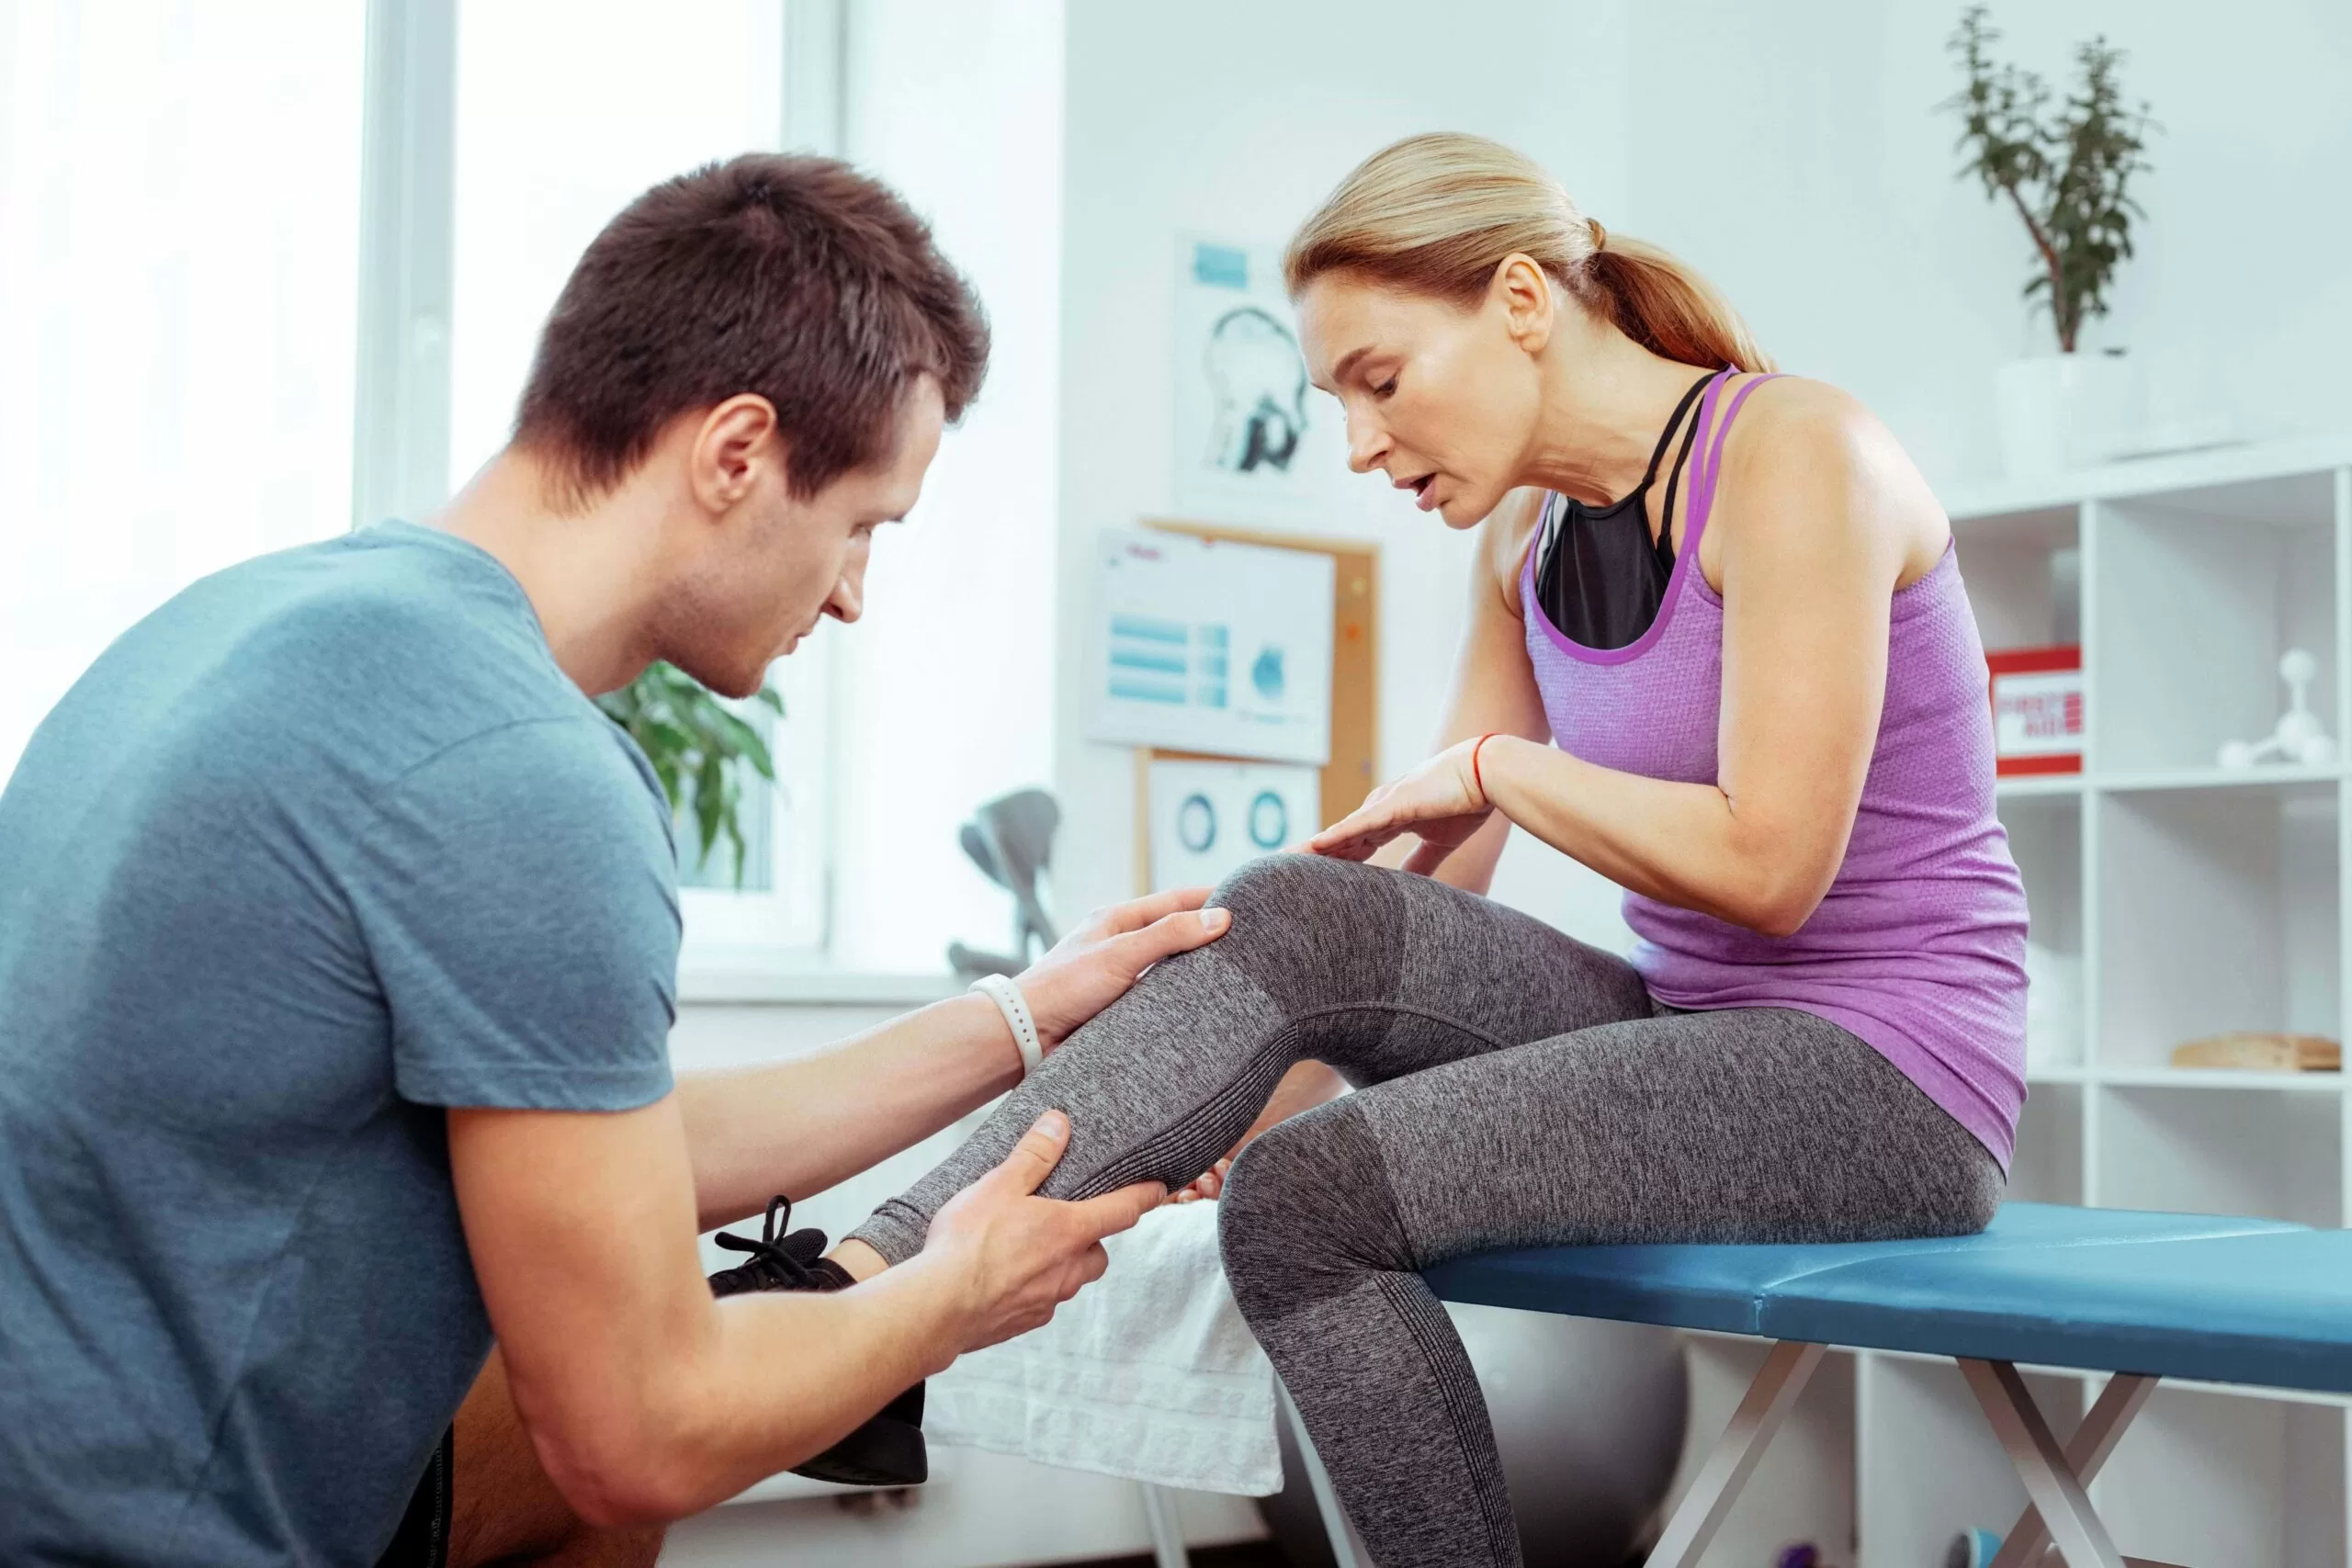 physical therapy jersey city elizabeth nj complete physical rehabilitation